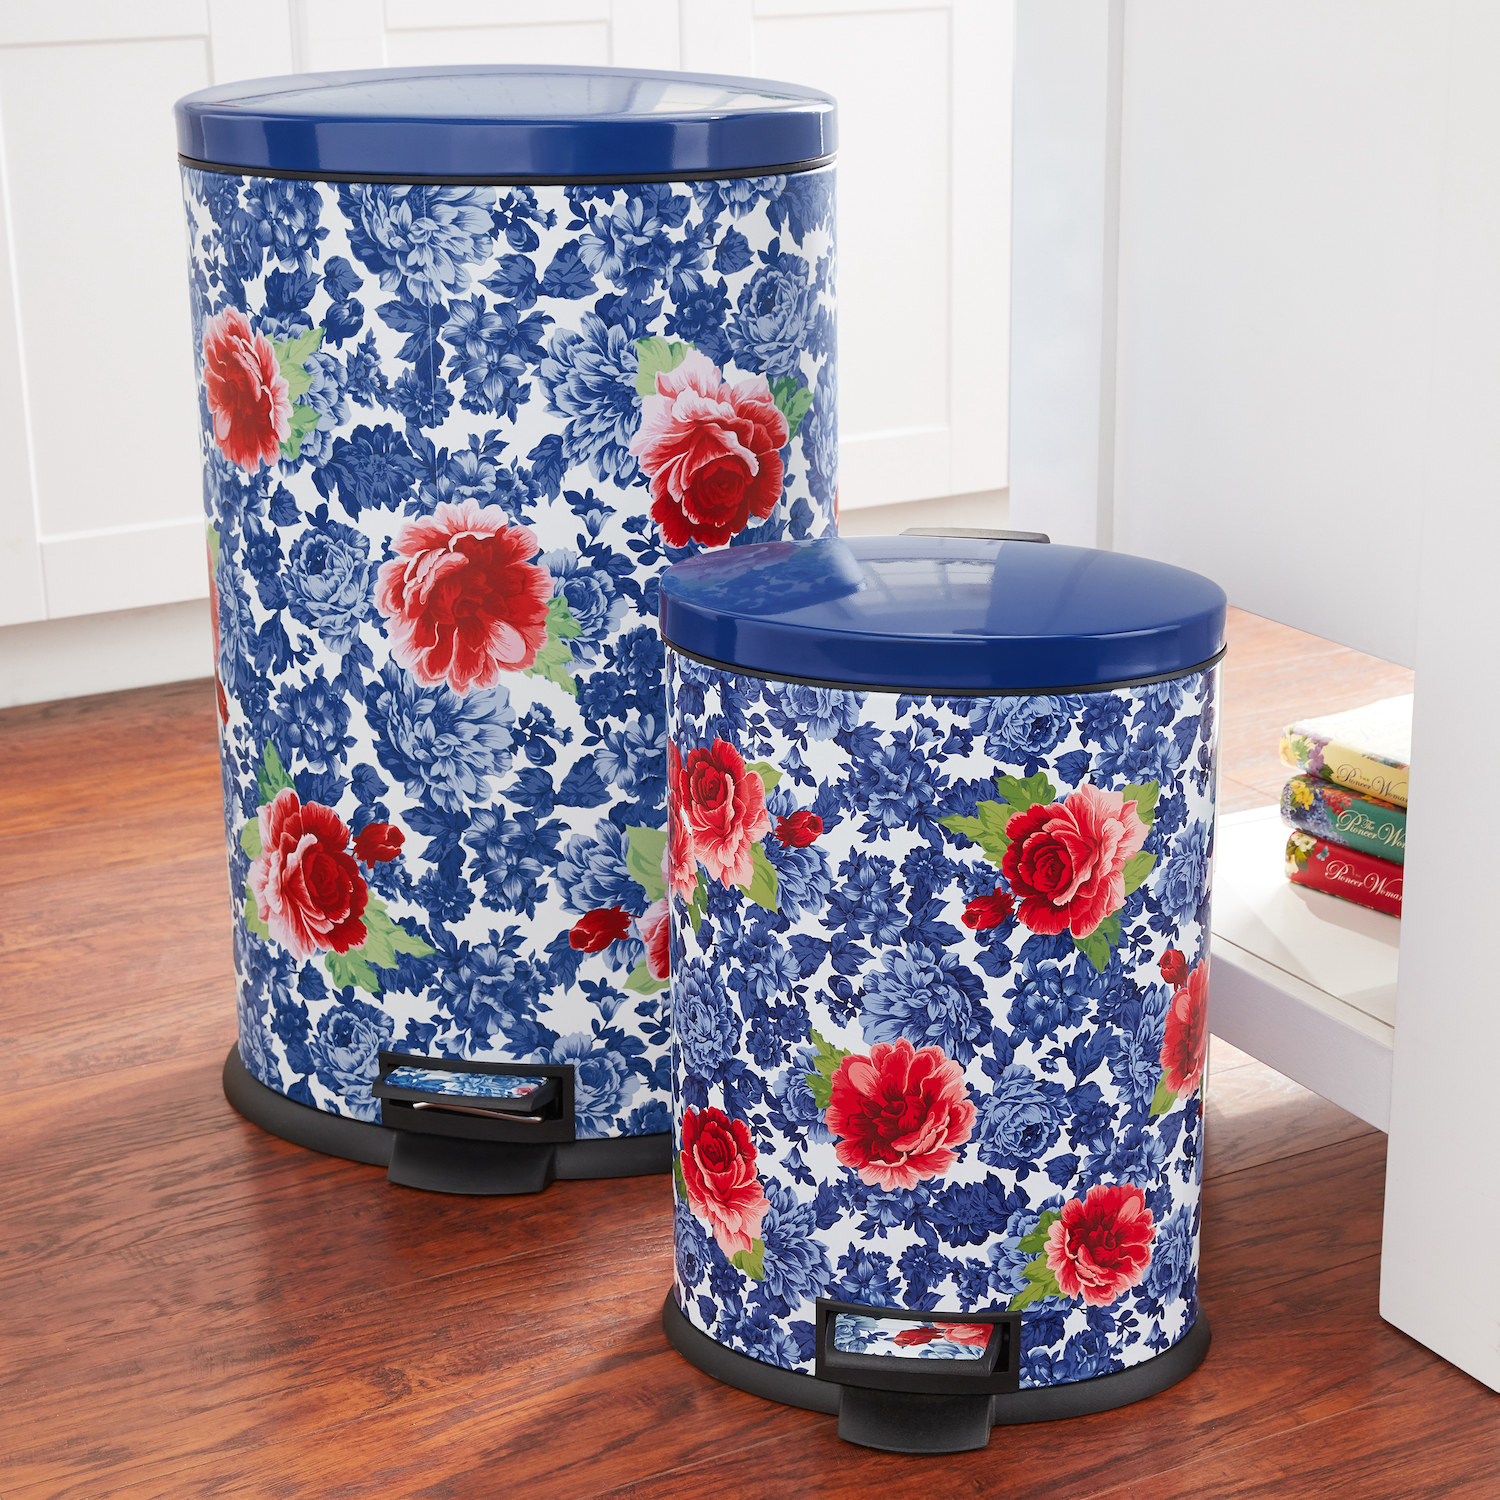 the blue floral trash cans